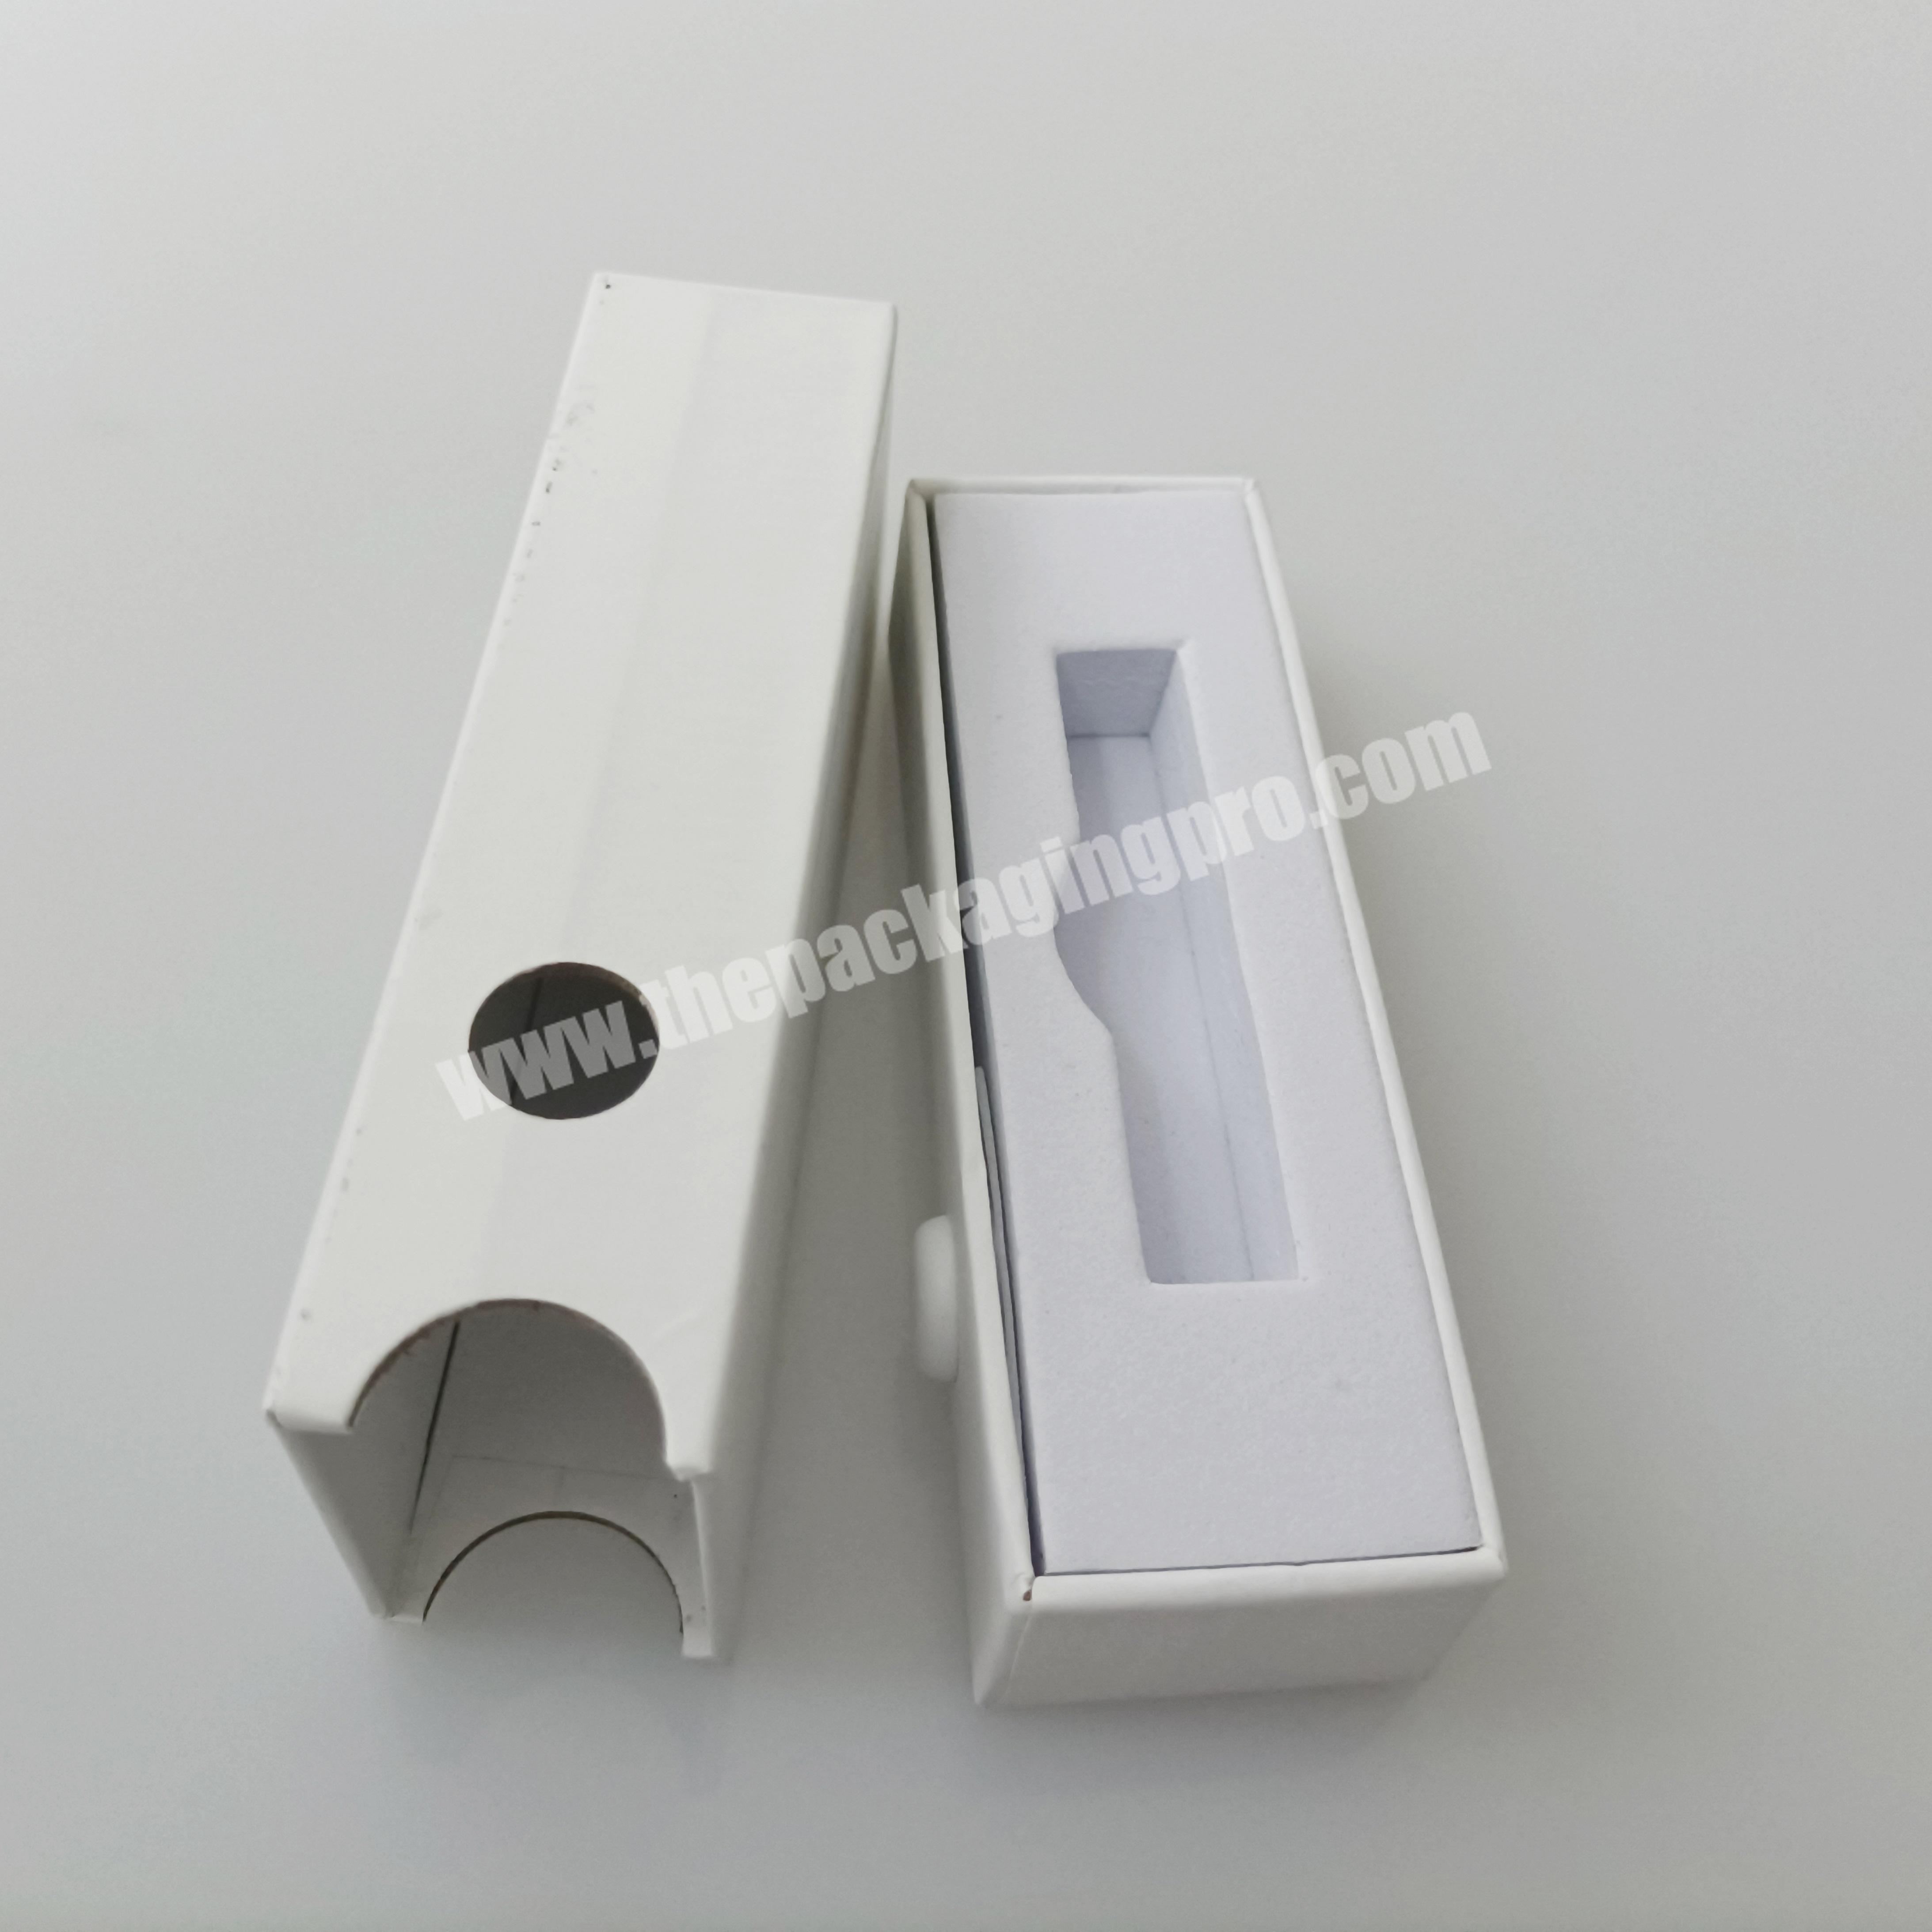 Certified Plastic Button Lock Child Proof Cigarette Packaging Child Resistant Paper Box for Oil Cartridge, Prerolls Joints